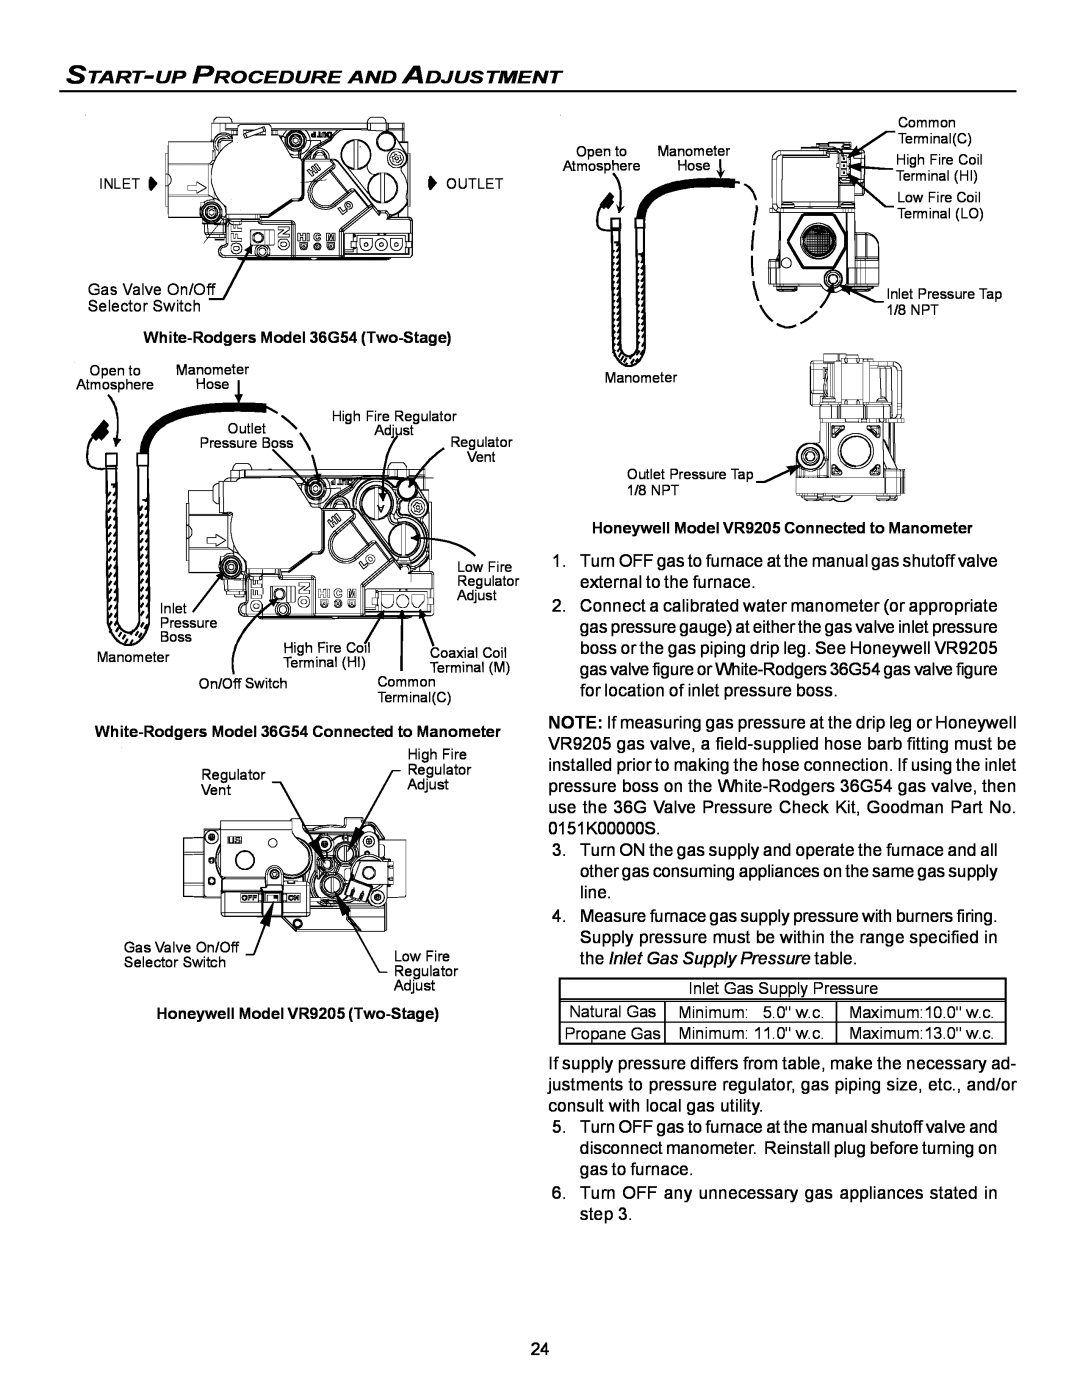 Goodman Mfg VC8 instruction manual Start-Up Procedure And Adjustment, Gas Valve On/Off Selector Switch 